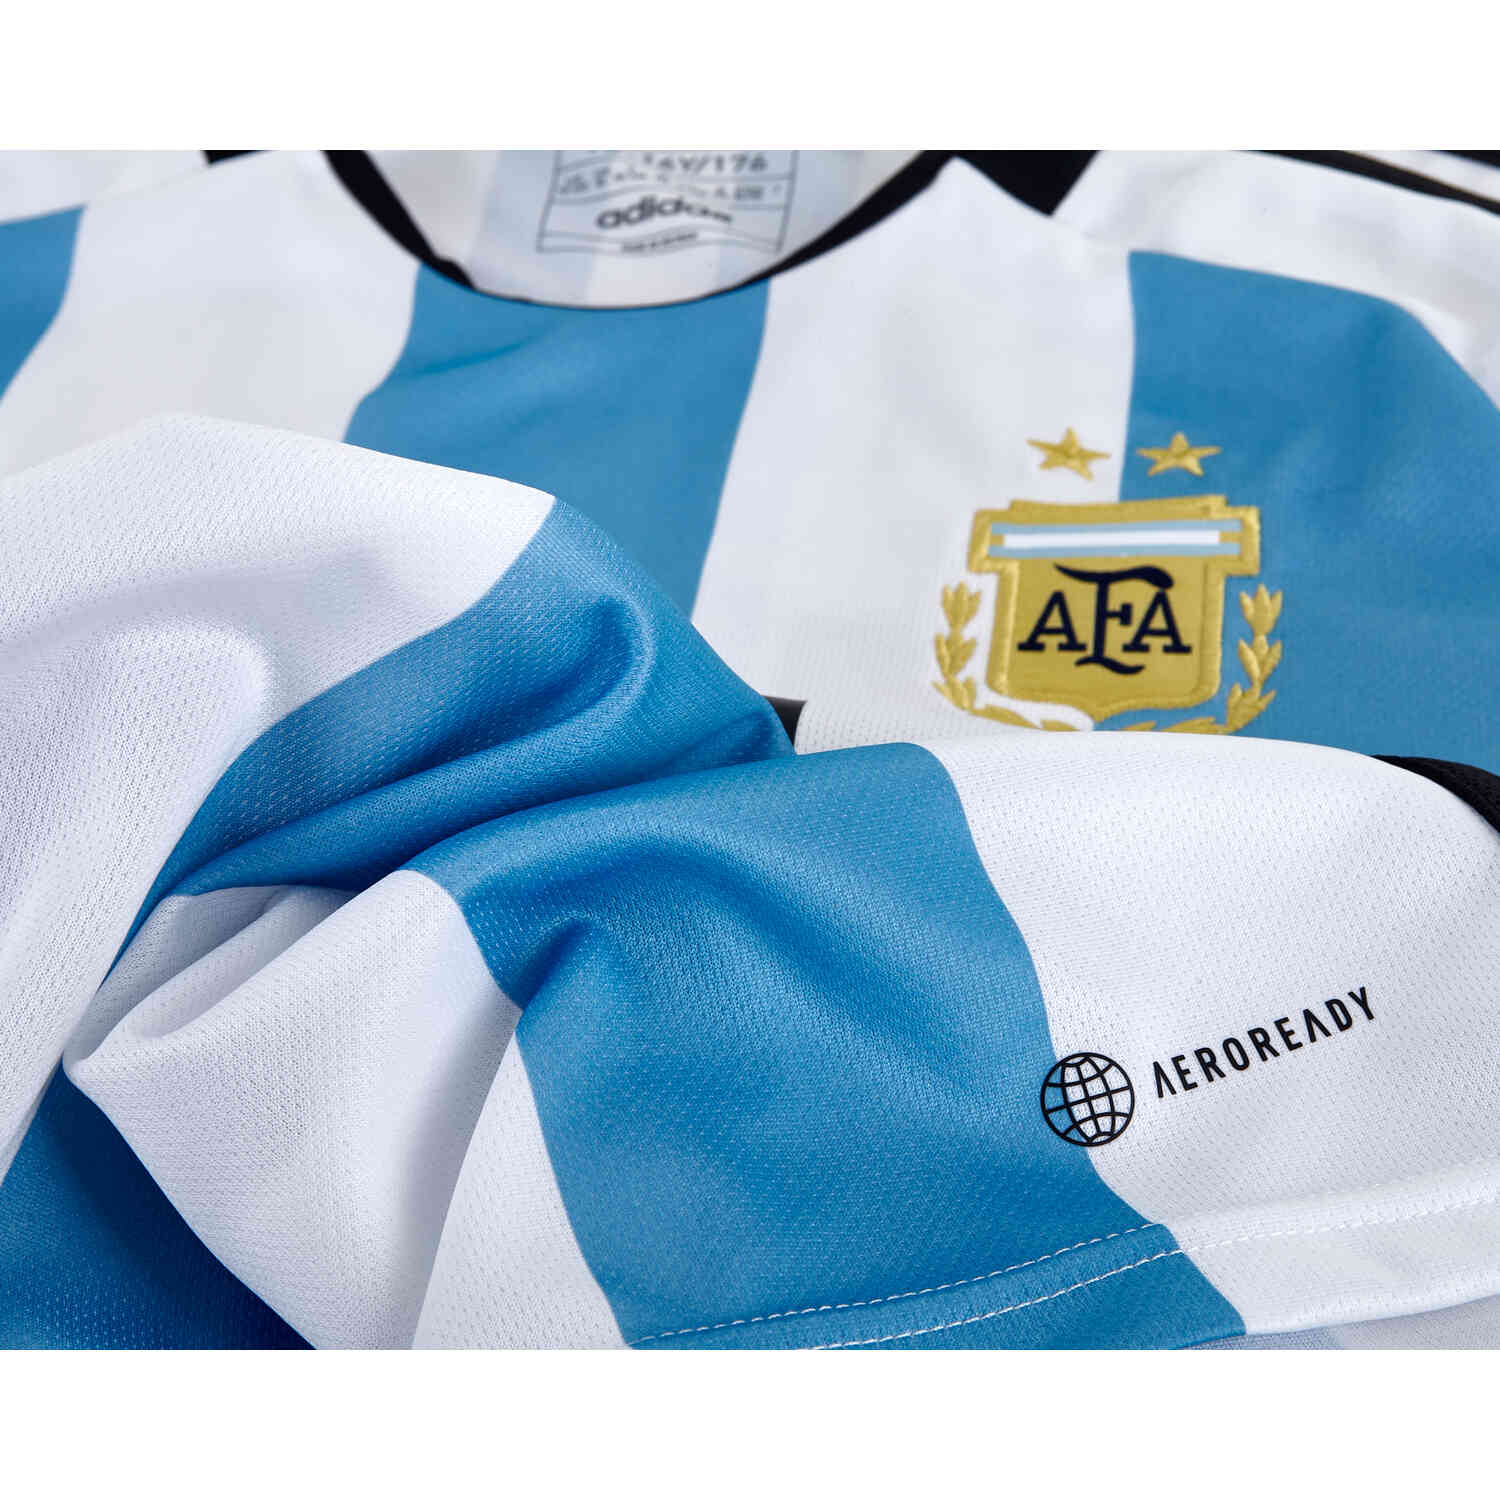 2021 adidas Argentina Home Authentic Jersey - Soccer Master